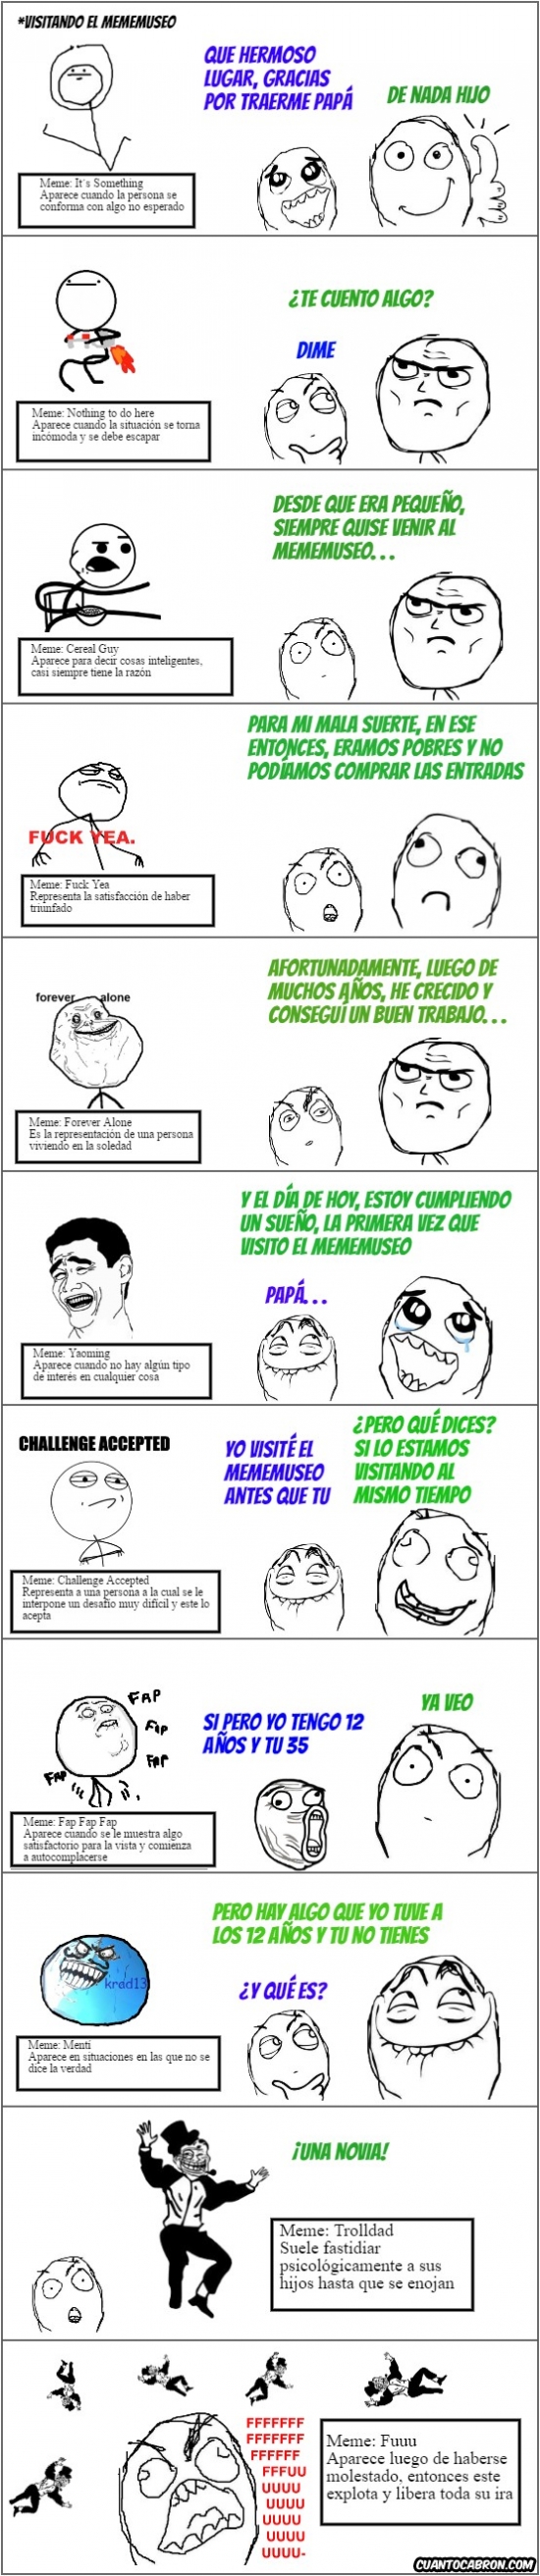 cereal guy,challenge accepted,forever alone,fuuu,its something,mememuseo,mentí,museo,nothing to do here,novia,trolldad,Usen bien a los memes,yaoming,yea